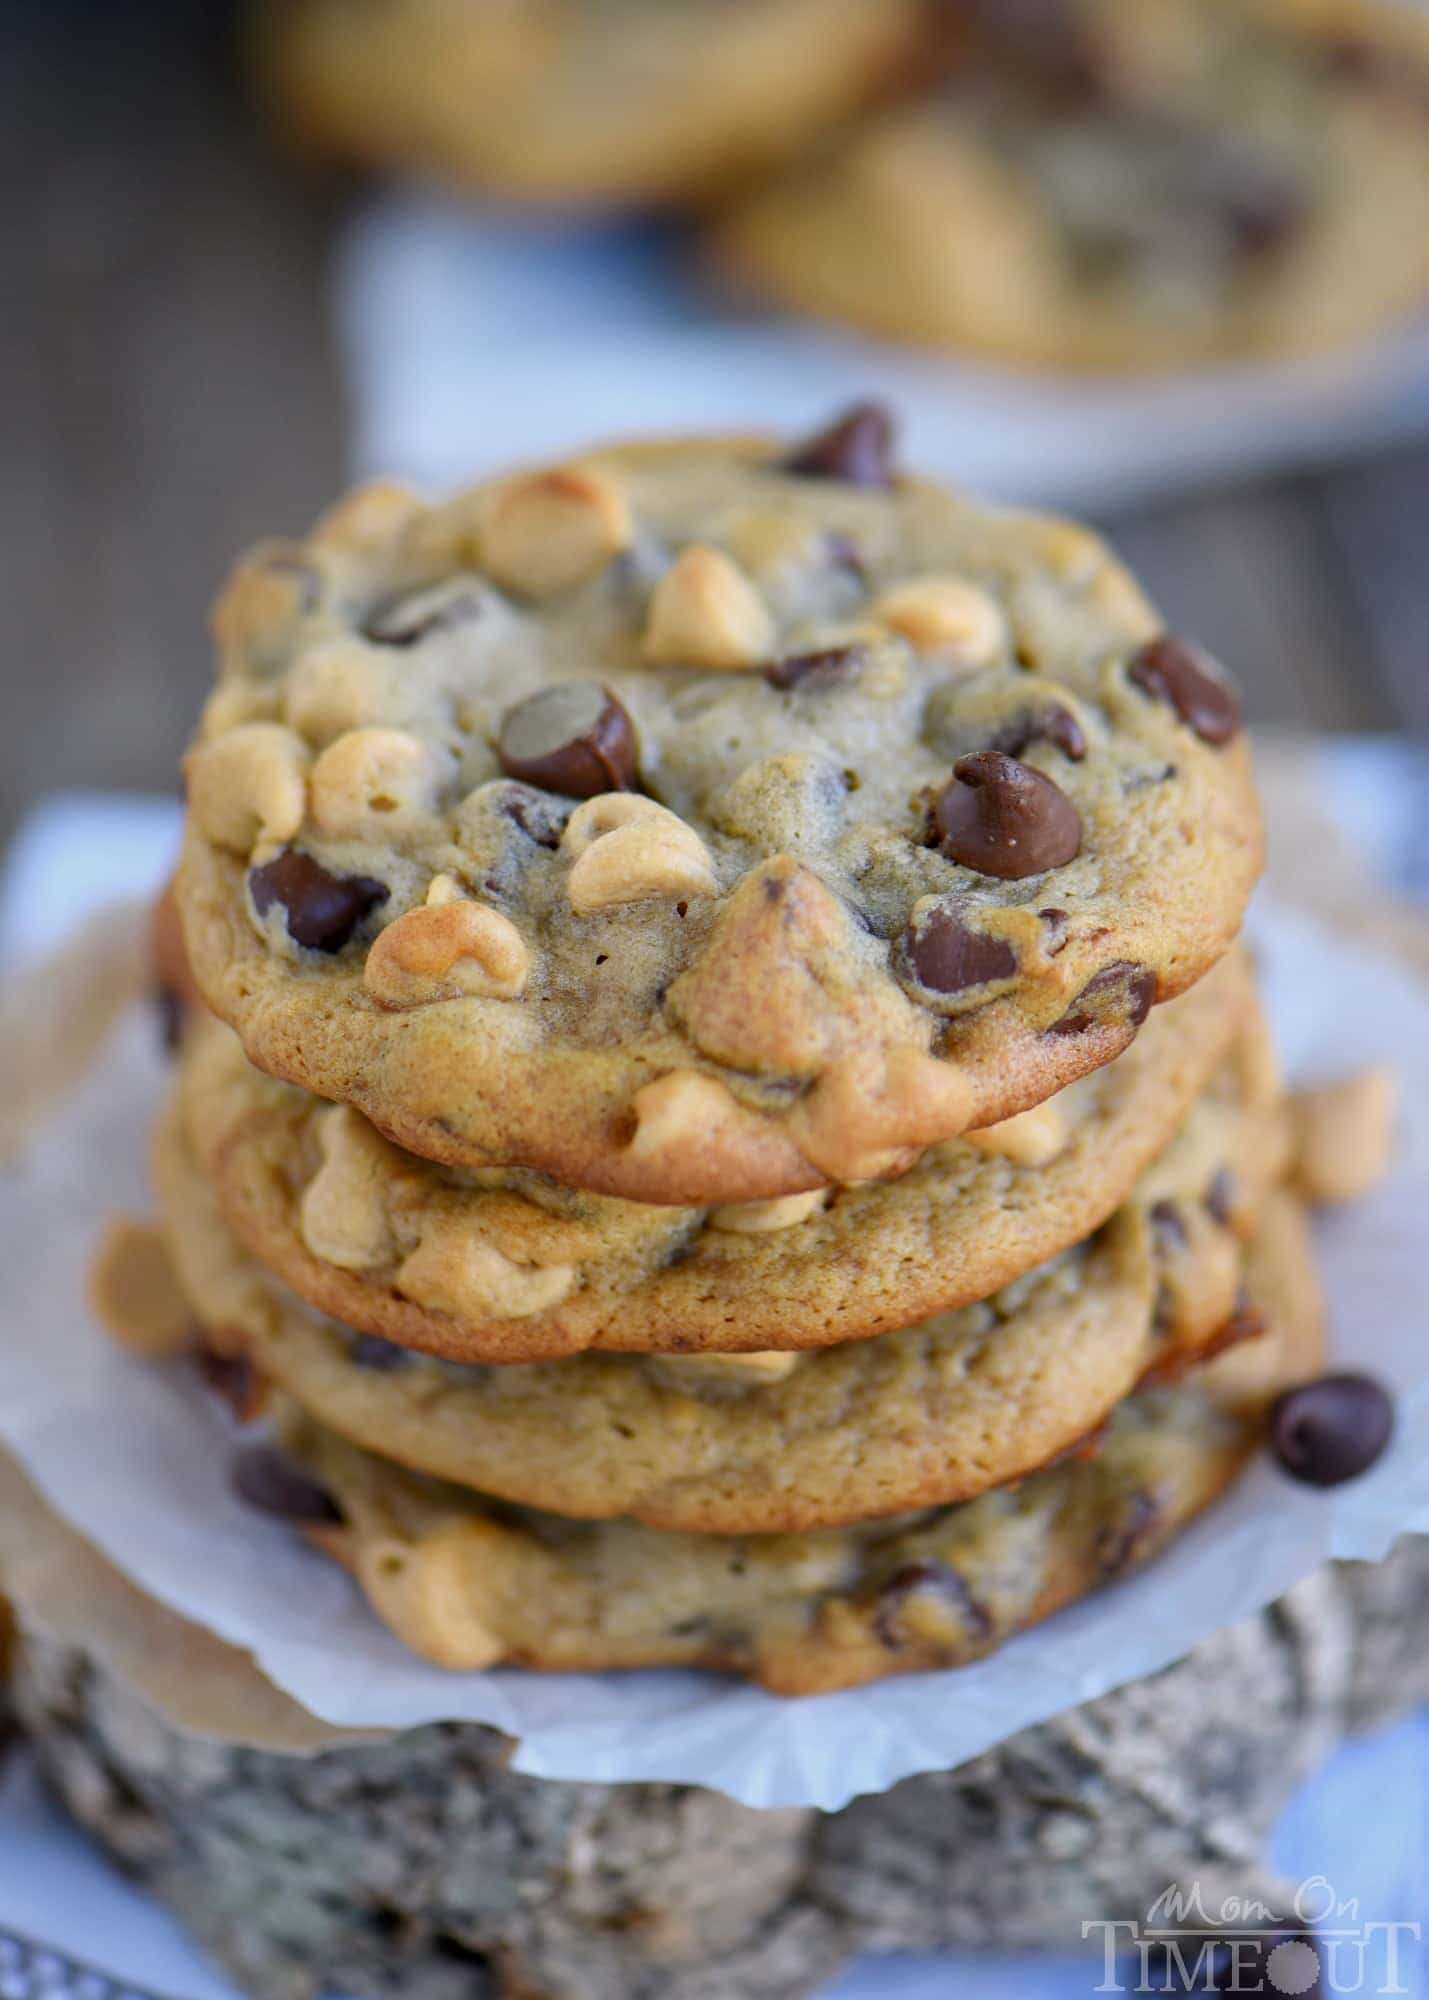 http://www.momontimeout.com/2017/03/peanut-butter-banana-chocolate-chip-cookies/